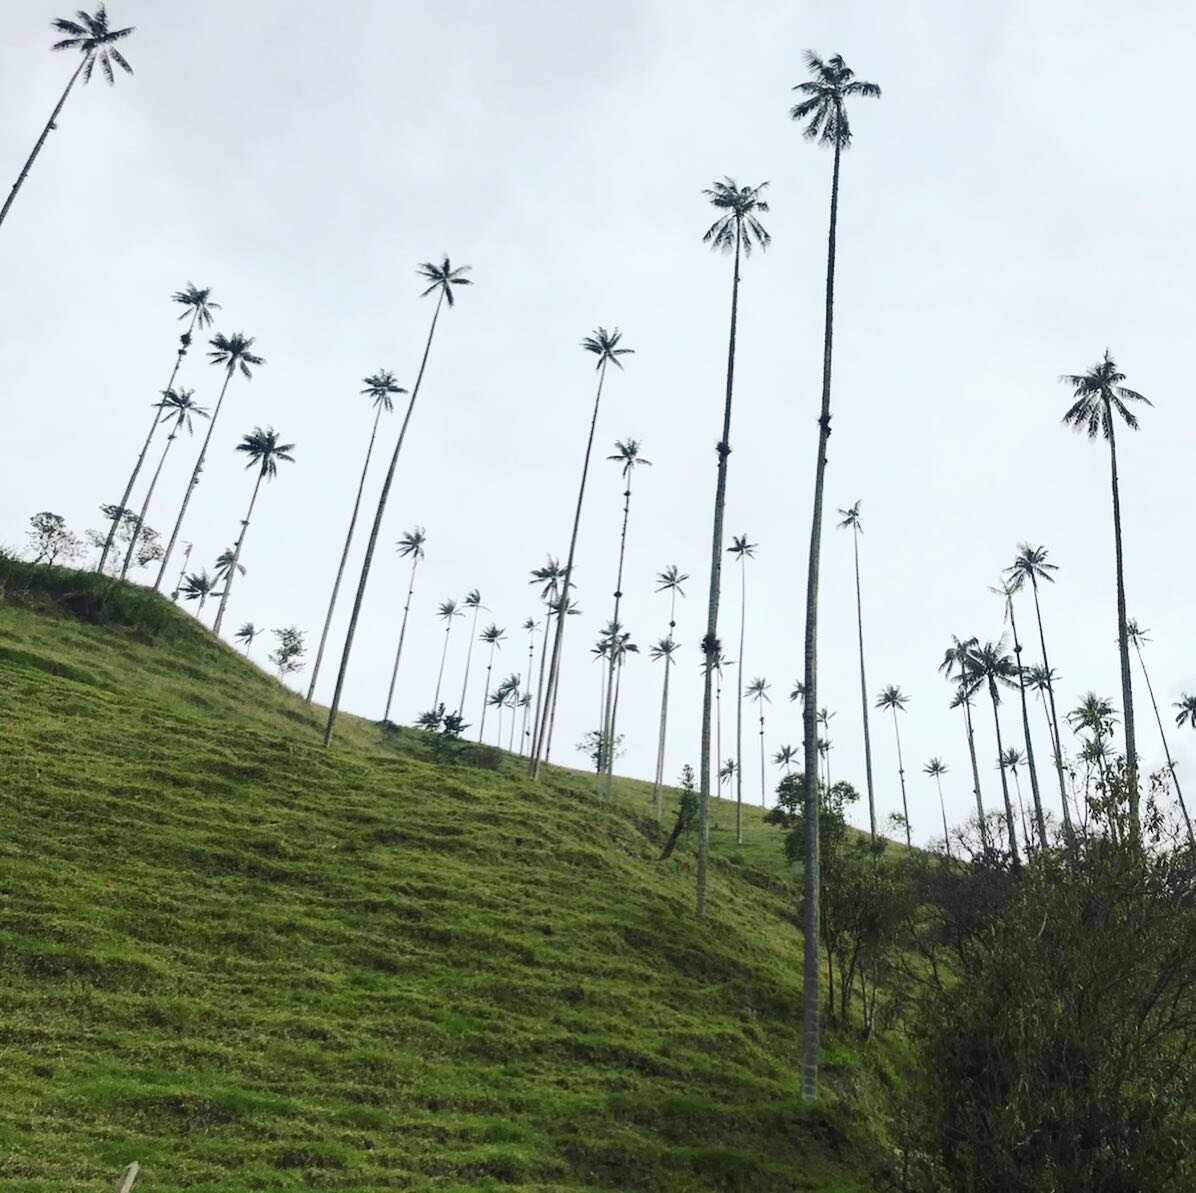 🇨🇴 Down the mountain, the Cocora Valley 🤩Giant palm tree forest🌴 #cocoravalley#redescendre🥴#malauxgenoux😰#lamontagnecavousgagne#passiontrekking#paramotrek#norbertoguia😘#🐄🐖🐕🐈🐏#paramillodelquindio#bestteamever💪